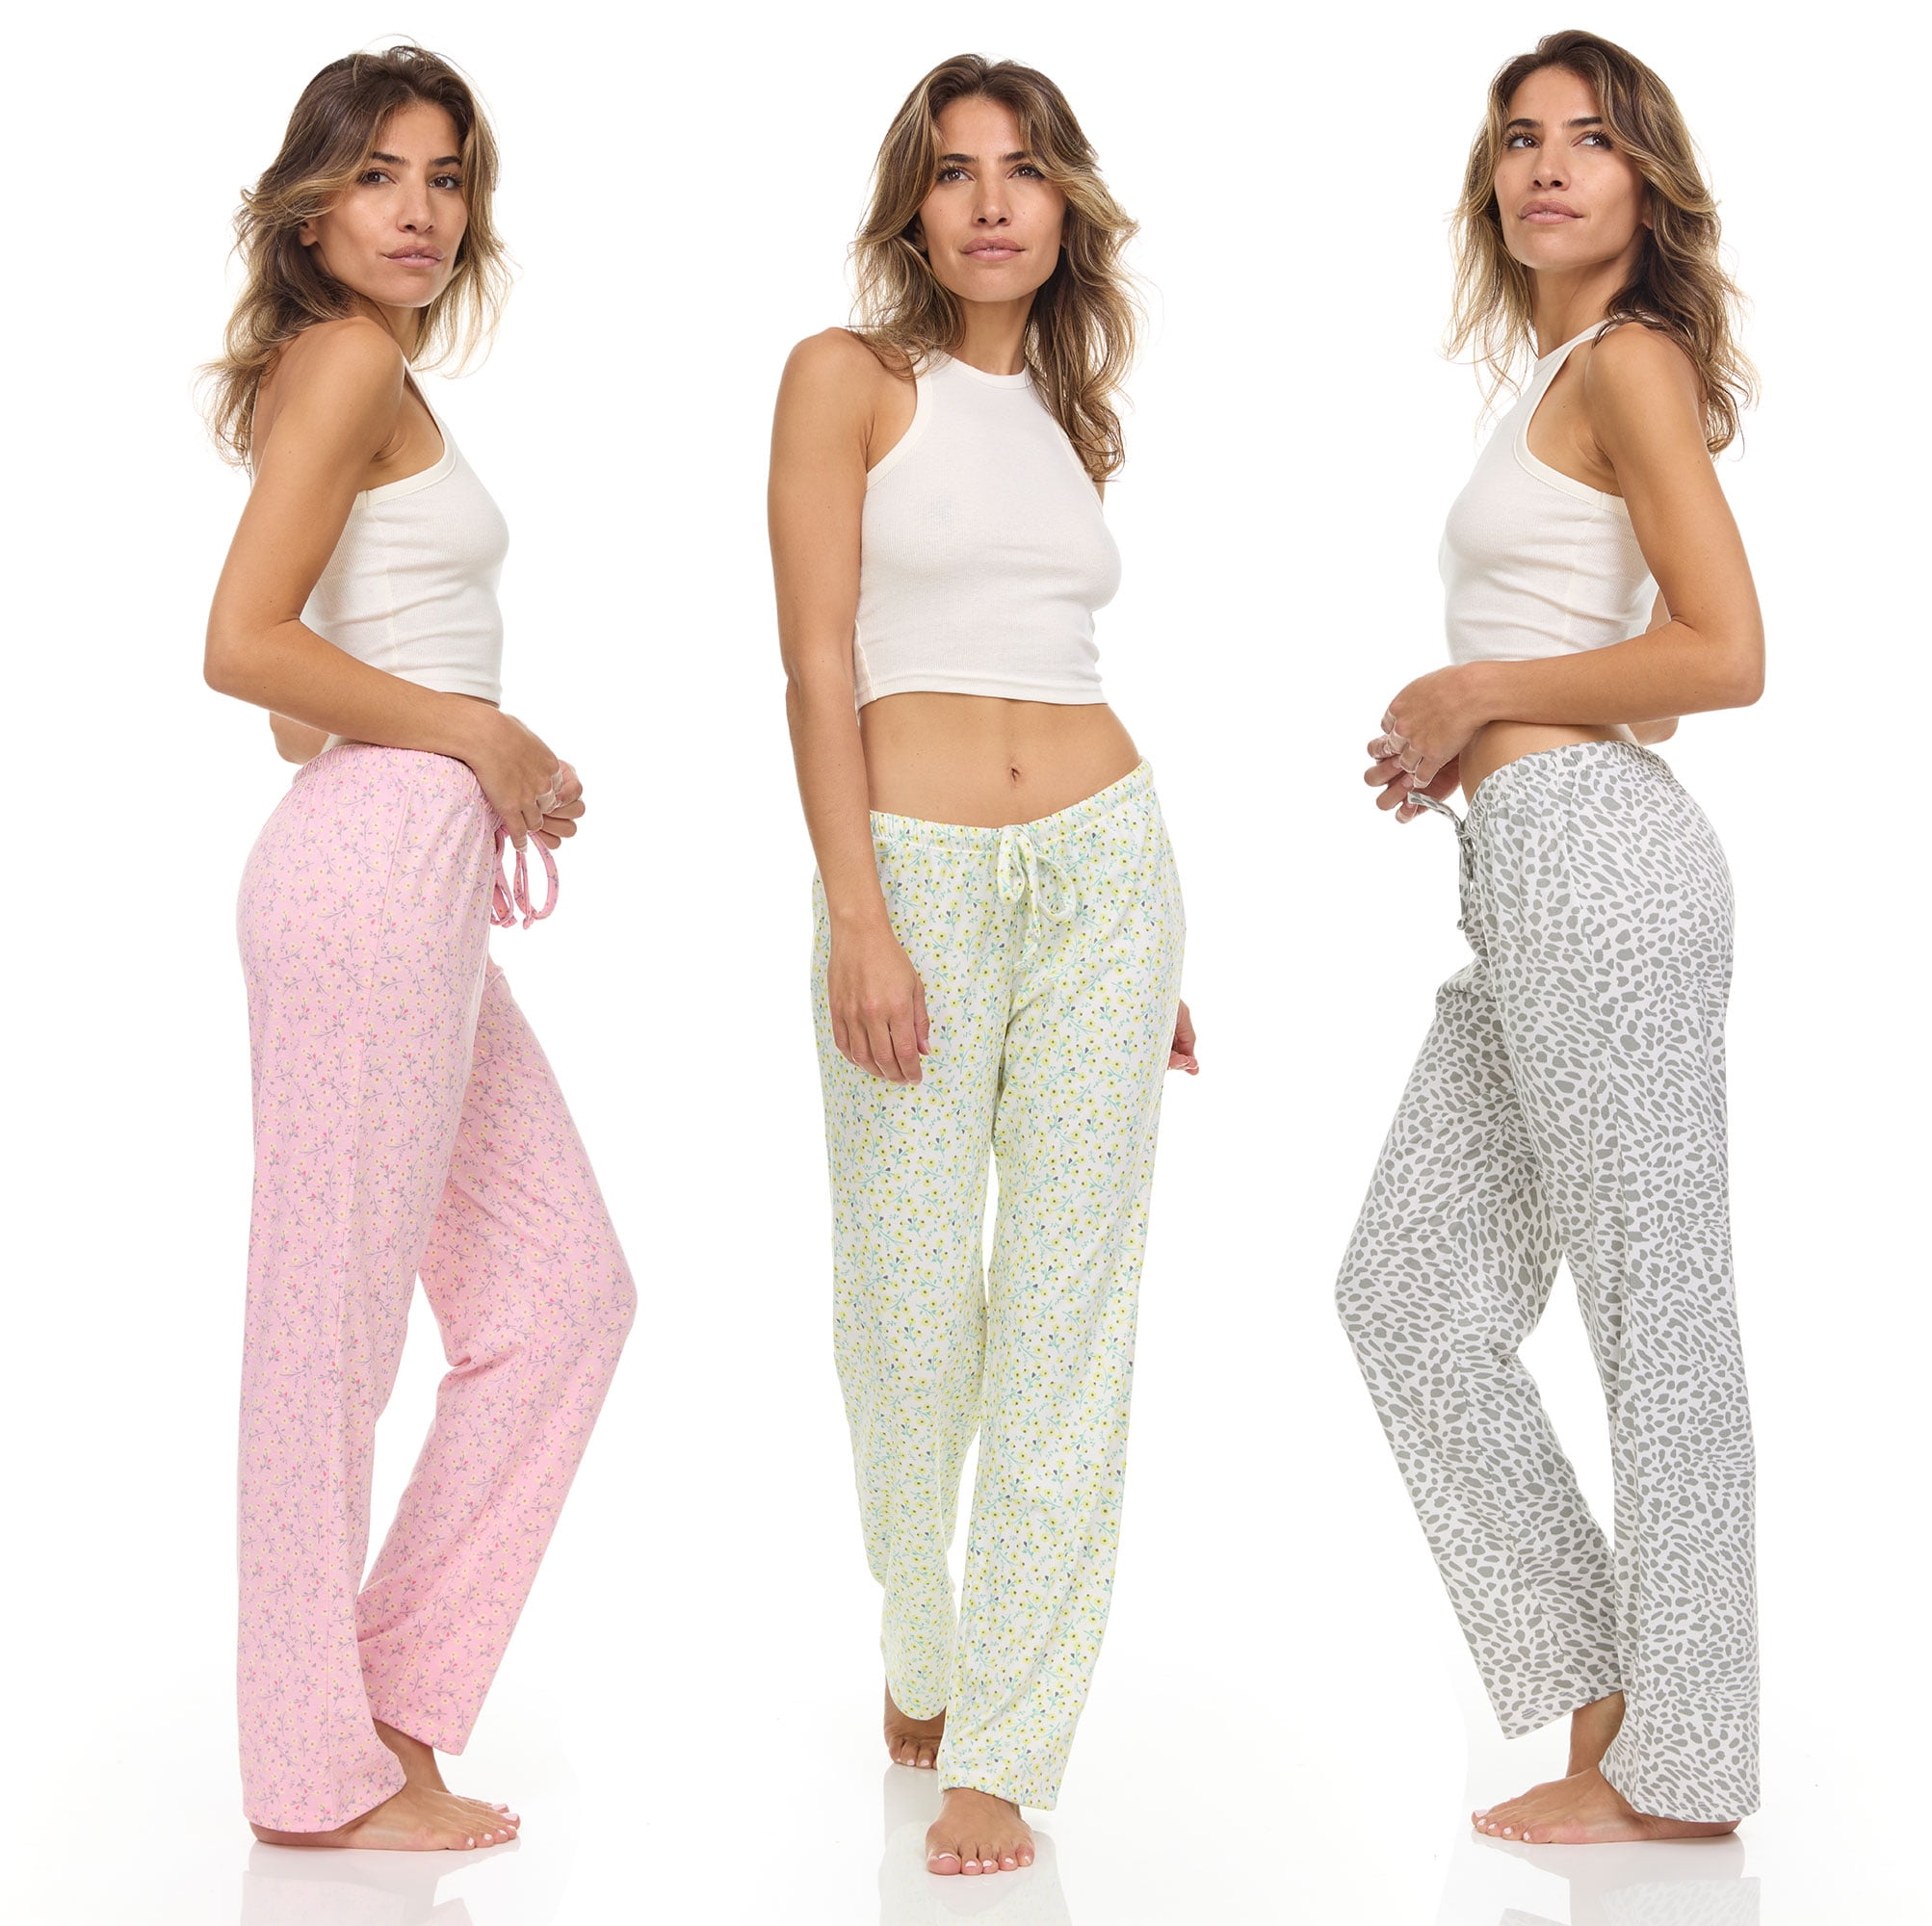 Picture of Daresay PJW-200-SET E-Yum Pnt-3Pk-XL Womens Printed Lounge Pajama Pants, Assorted Color - Extra Large - Pack of 3